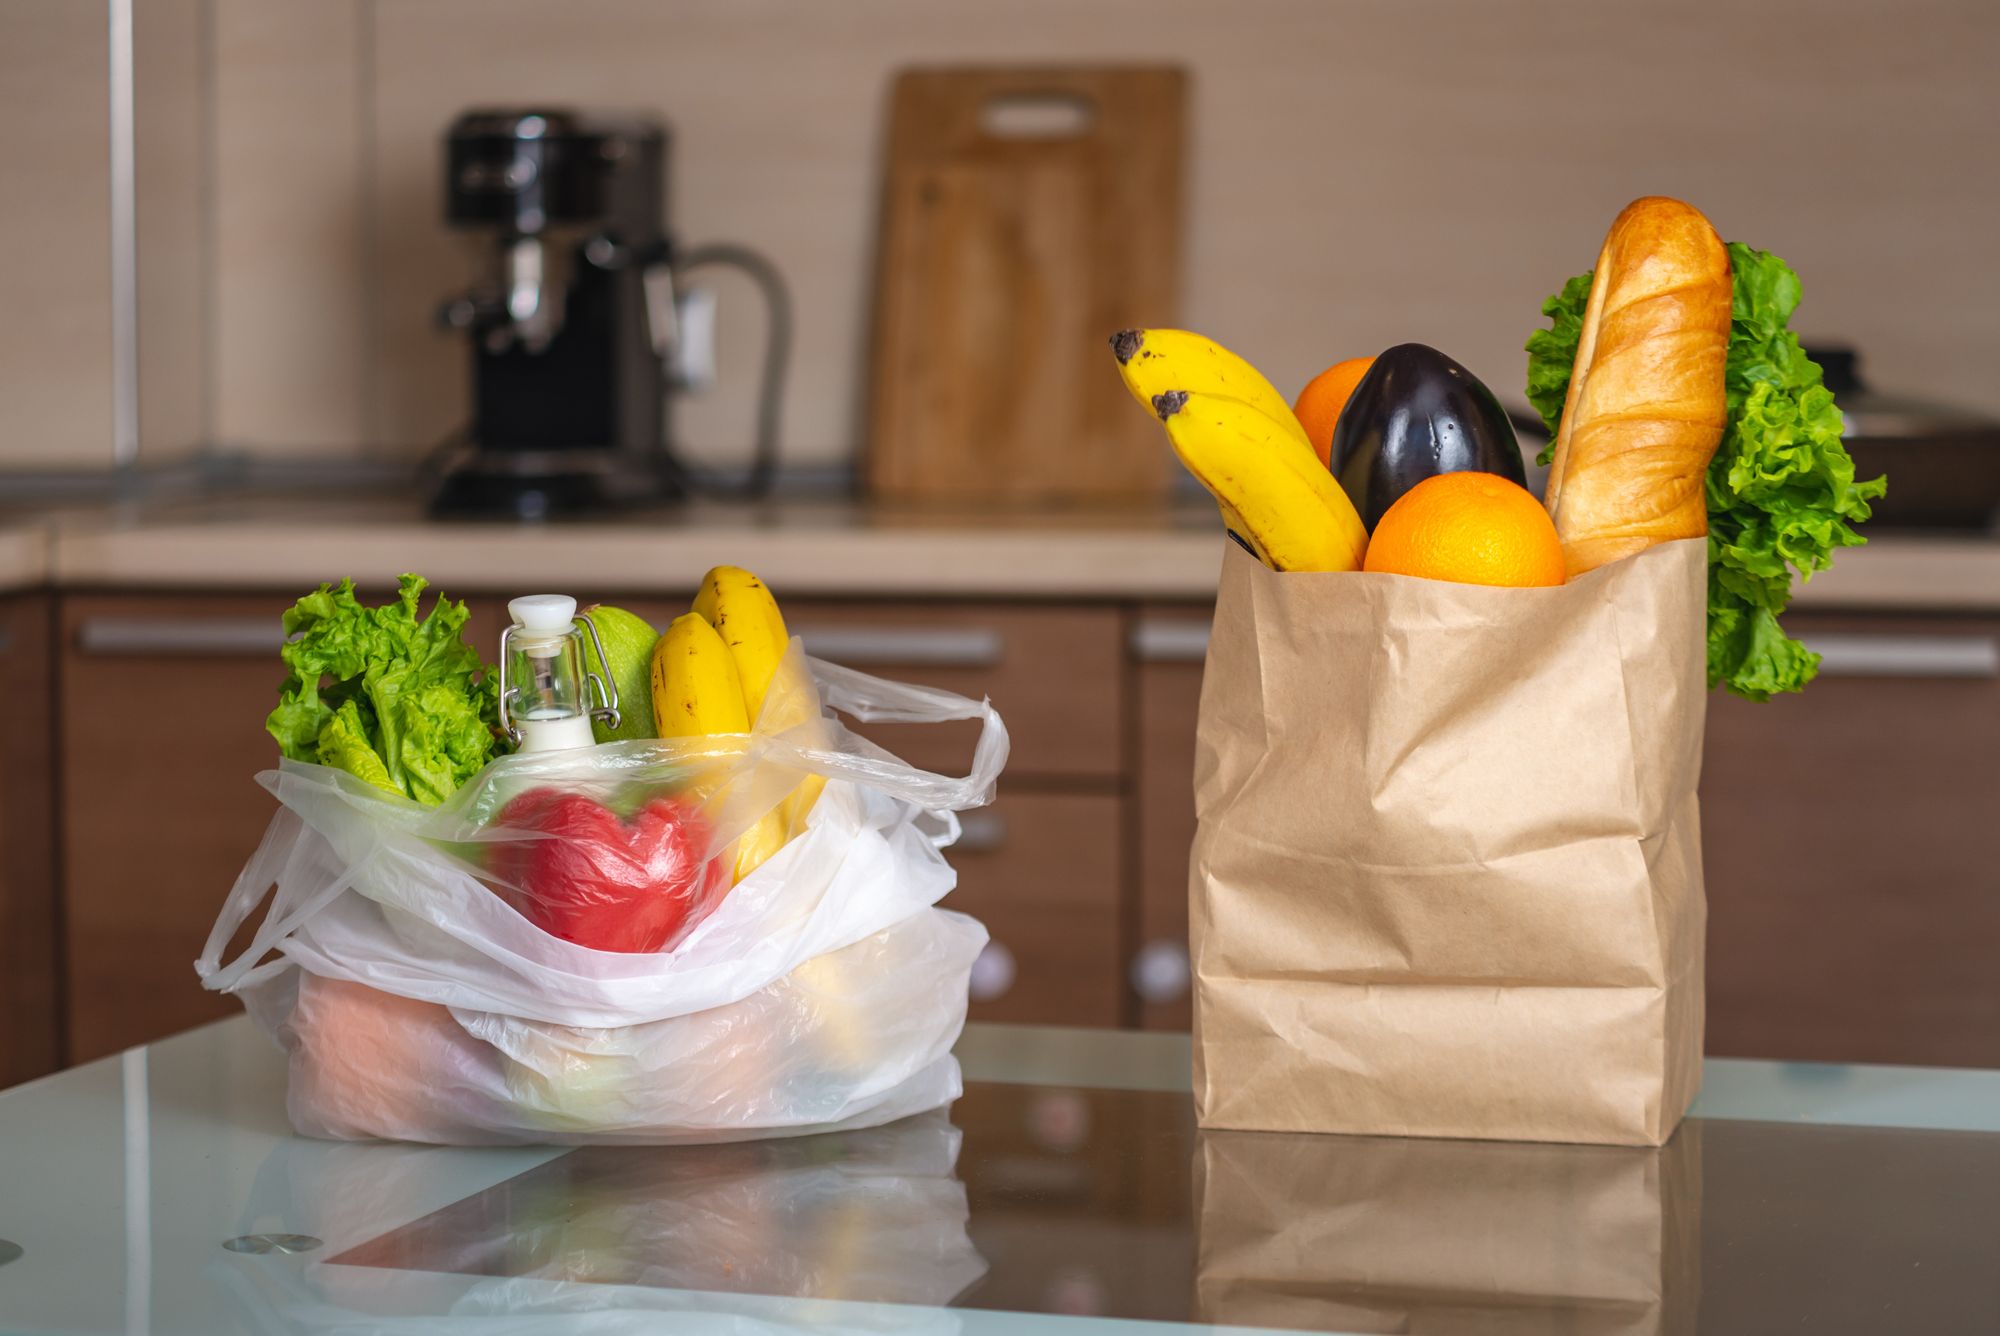 Do Plastic Takeout Bags Have a Future?